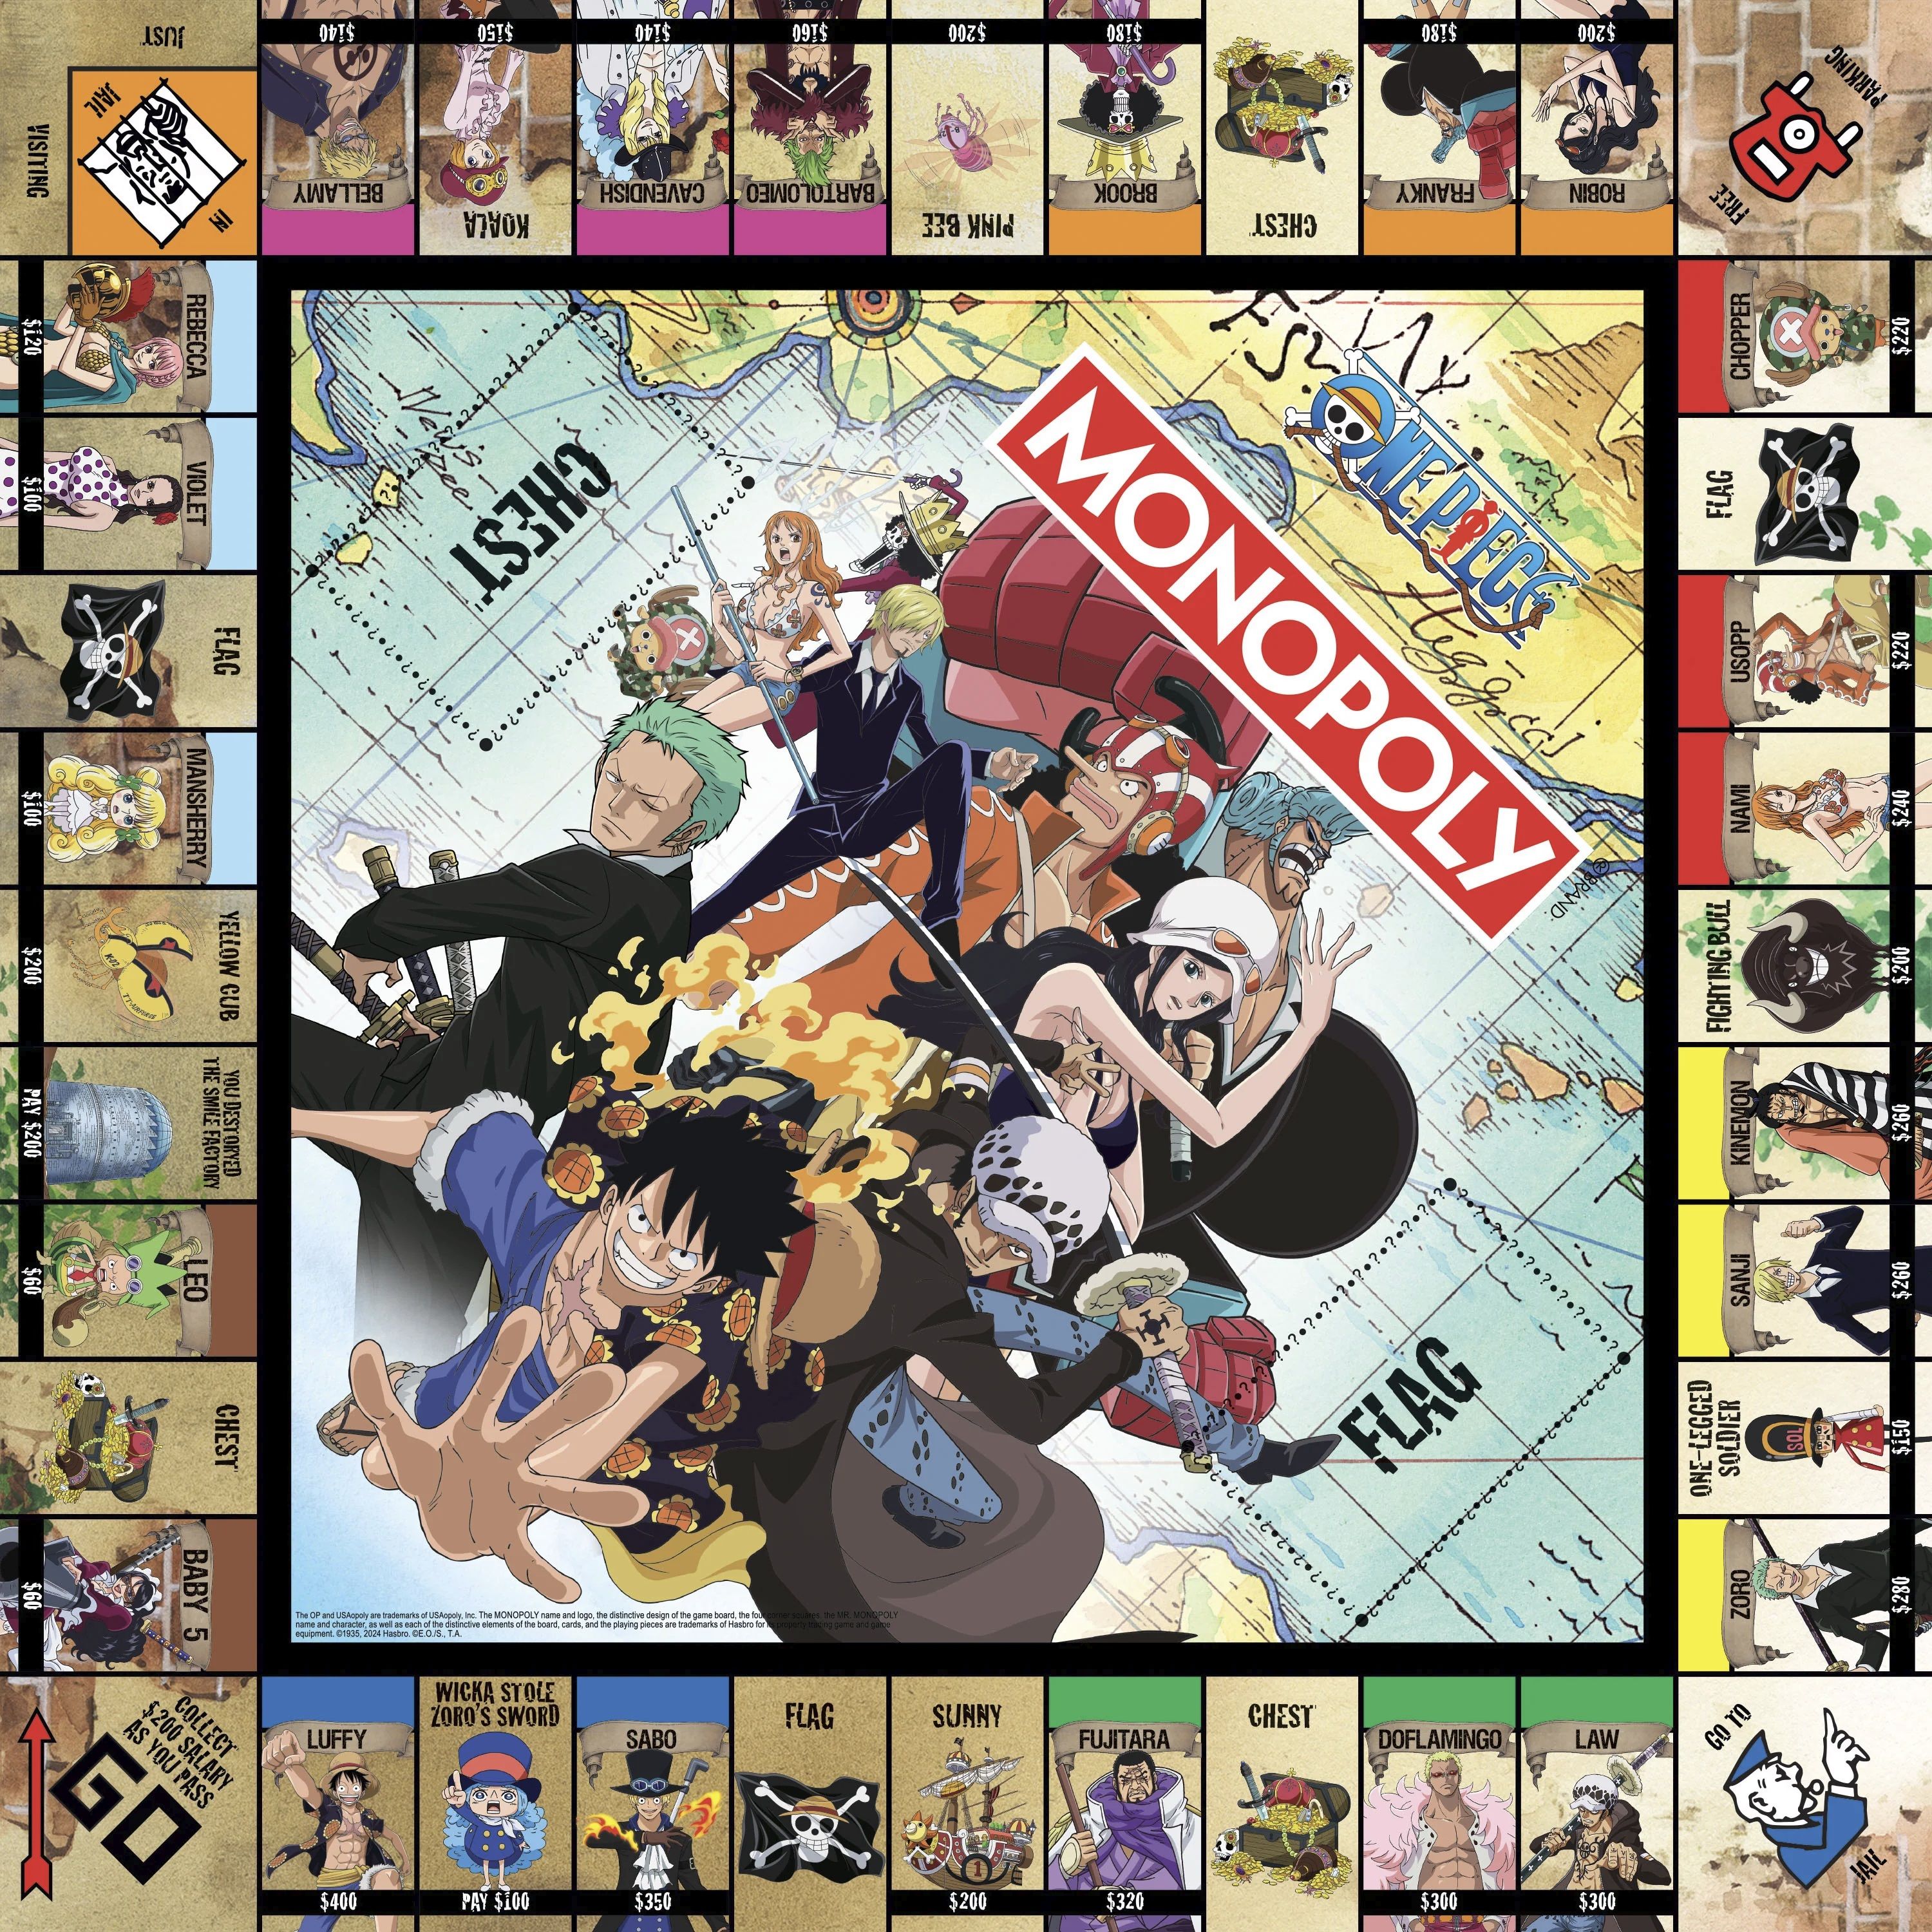 Official One Piece edition Monopoly showing exclusive game board